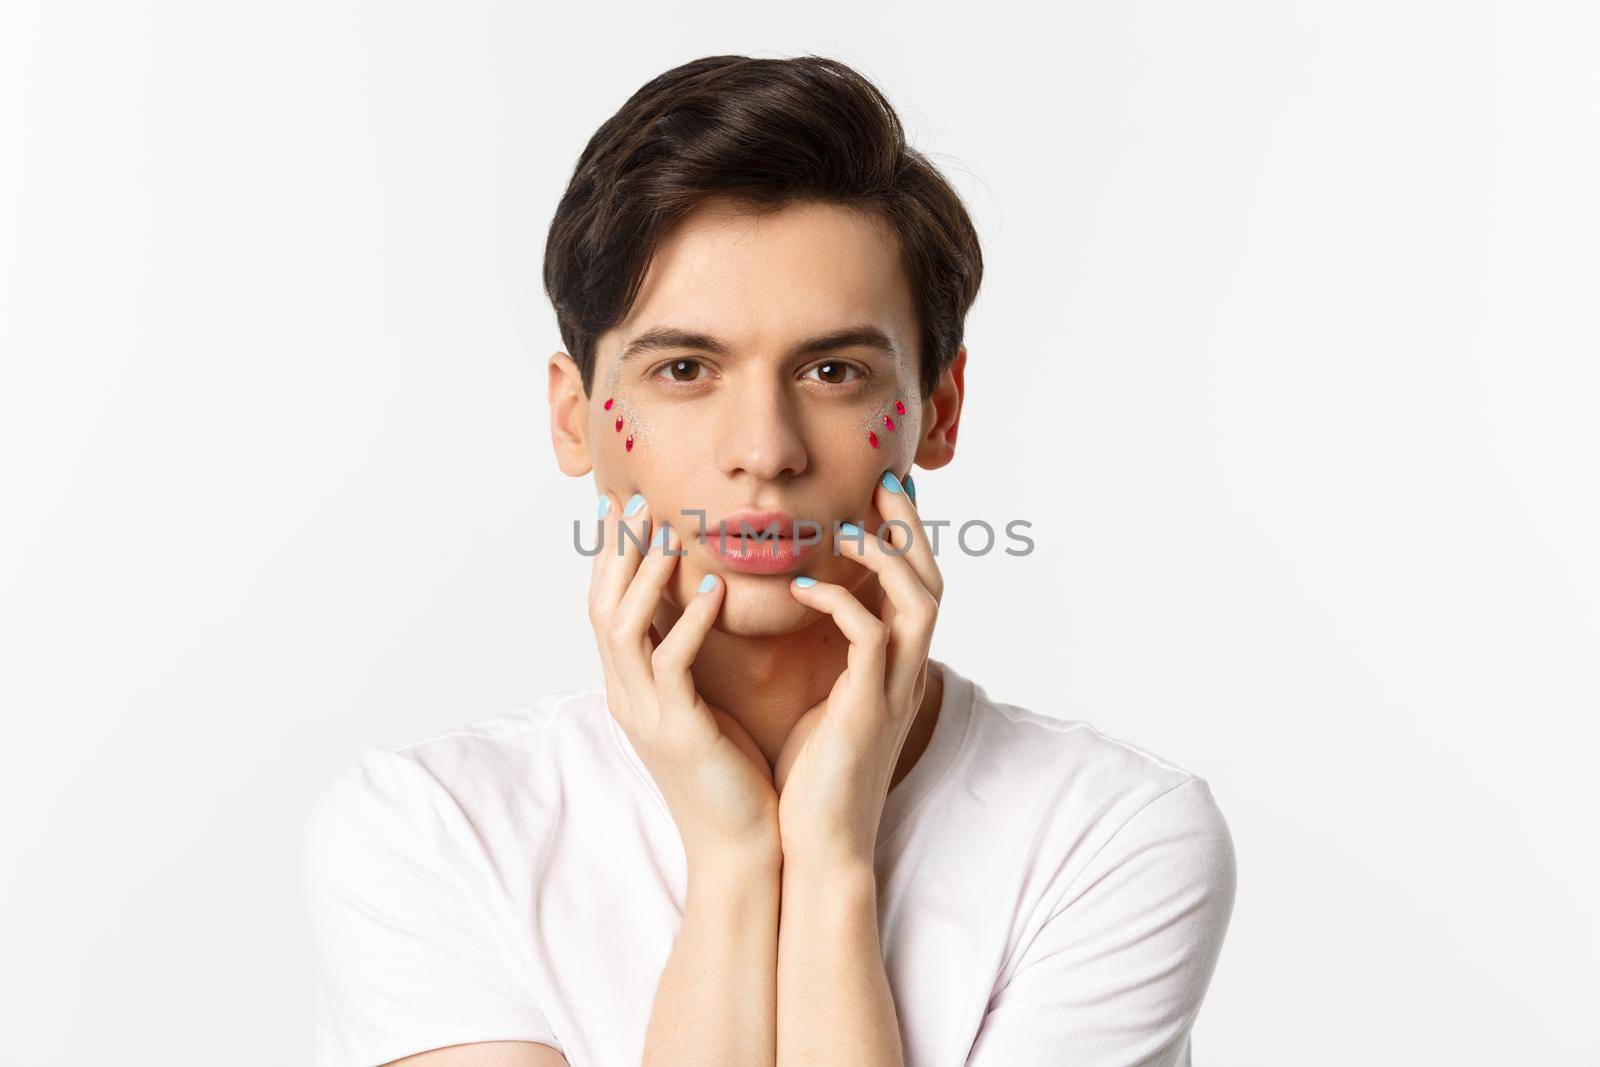 People, lgbtq and beauty concept. Close-up of beautiful queer man touching face with fingers with blue nail polish, standing over white background.